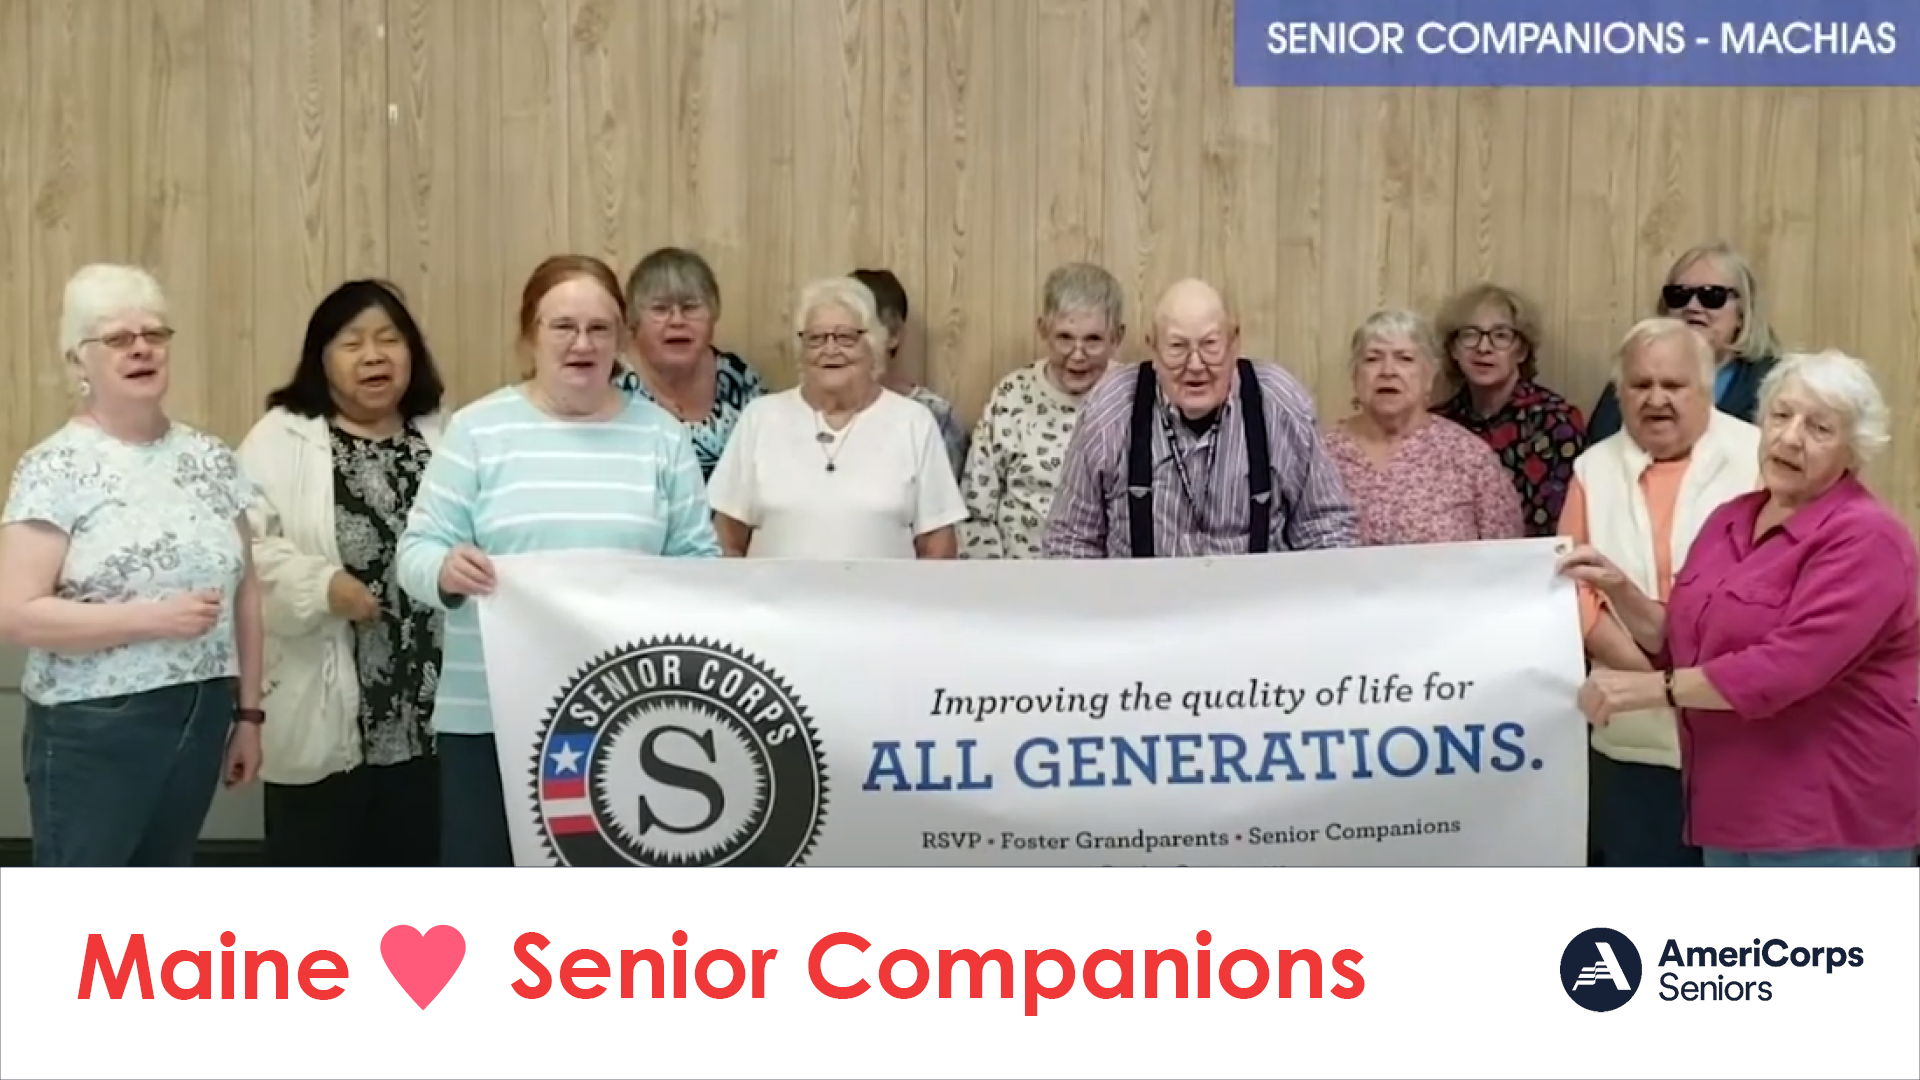 decorative graphic featuring group photo of older citizens in a community room behind a banner